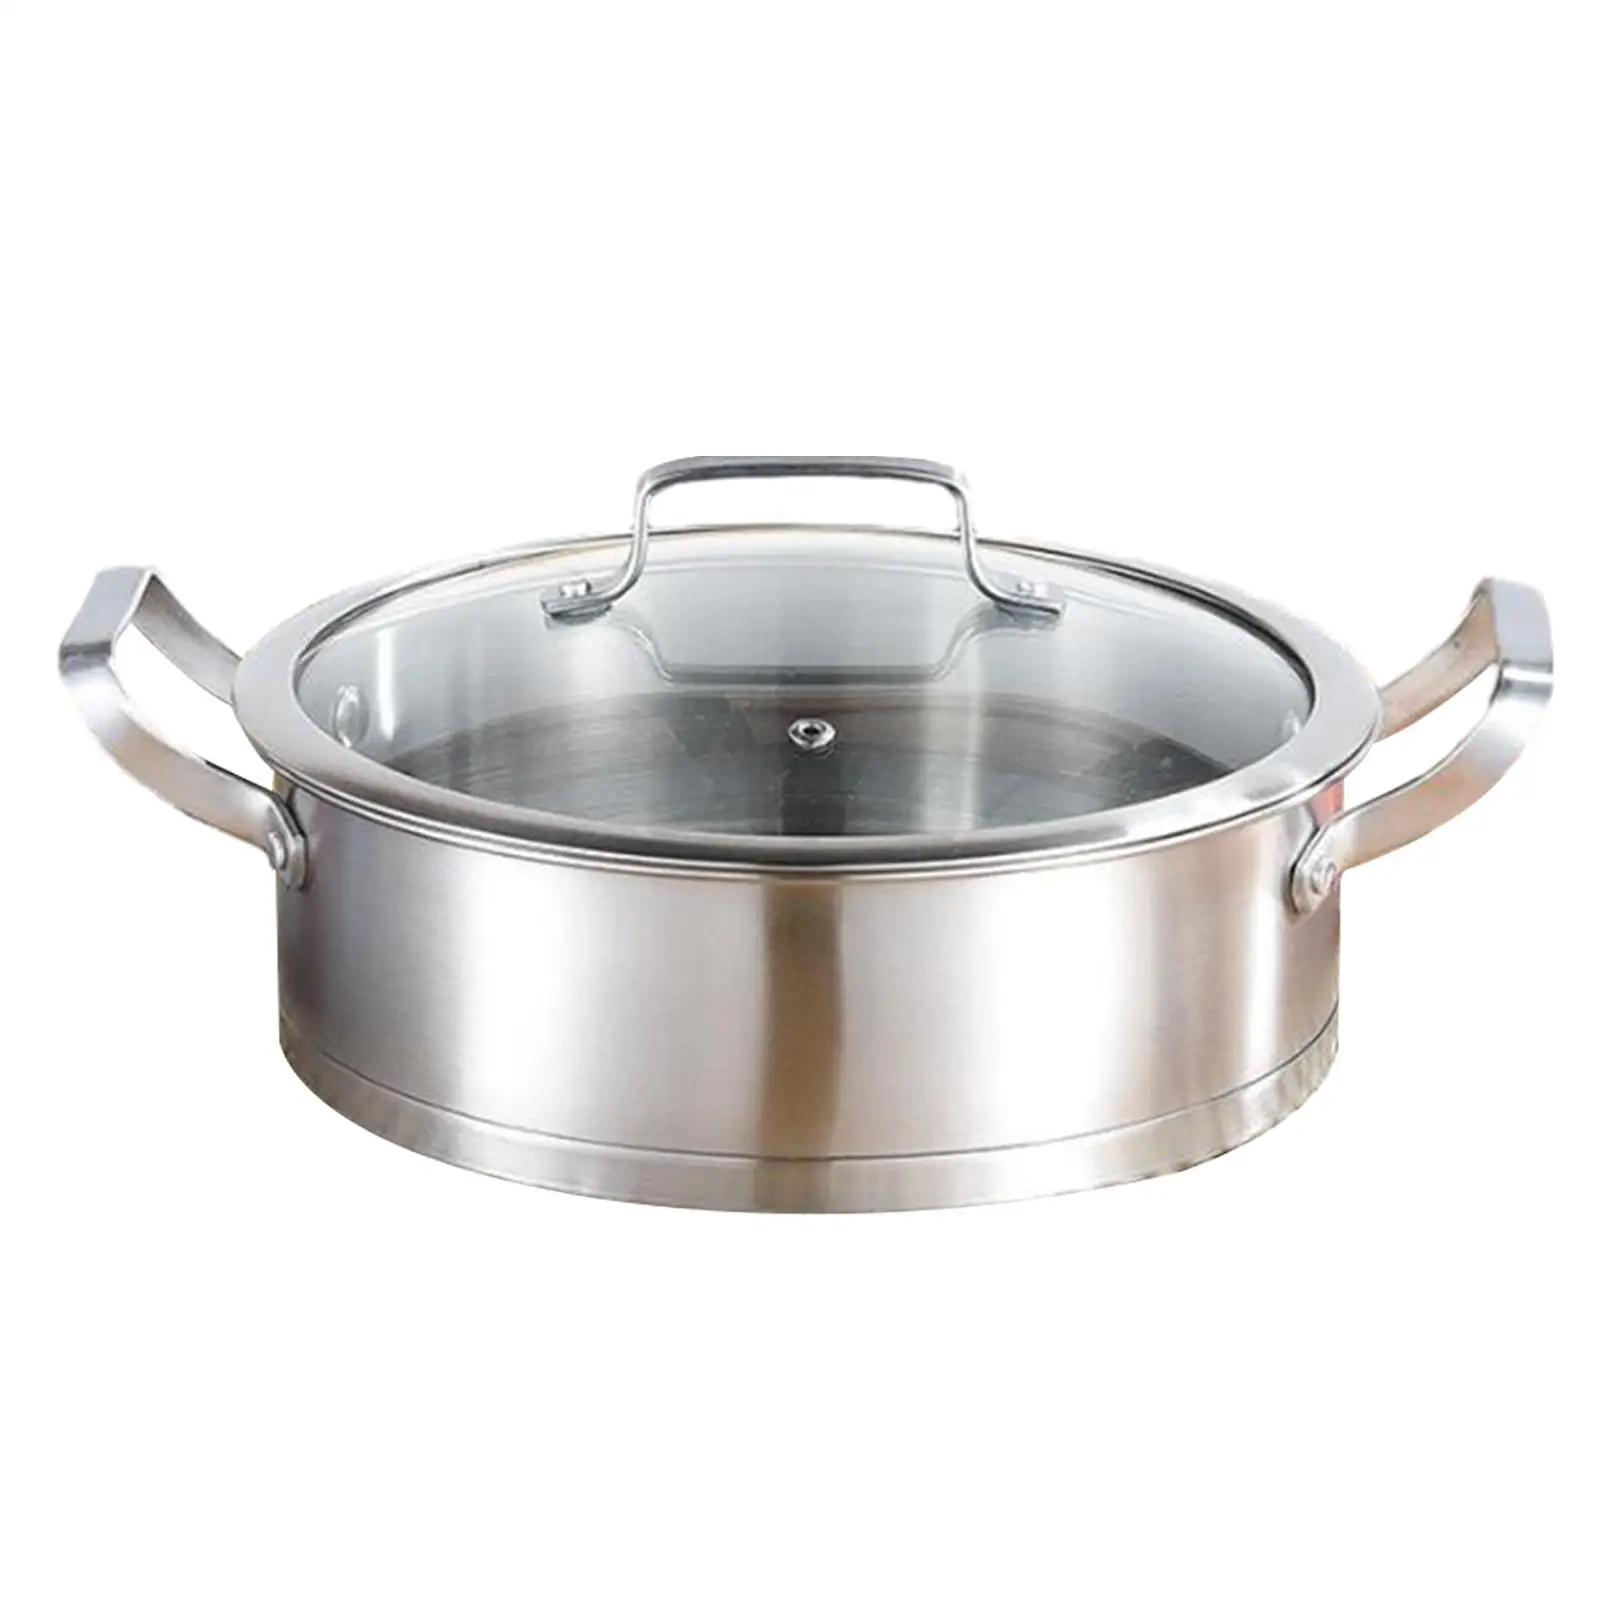 Kitchen Utensils Frying Pan Cooking Tools Multipurpose Kitchen Pot Stainless Steel Cooking Pot for Bar Kitchen Countertop Home